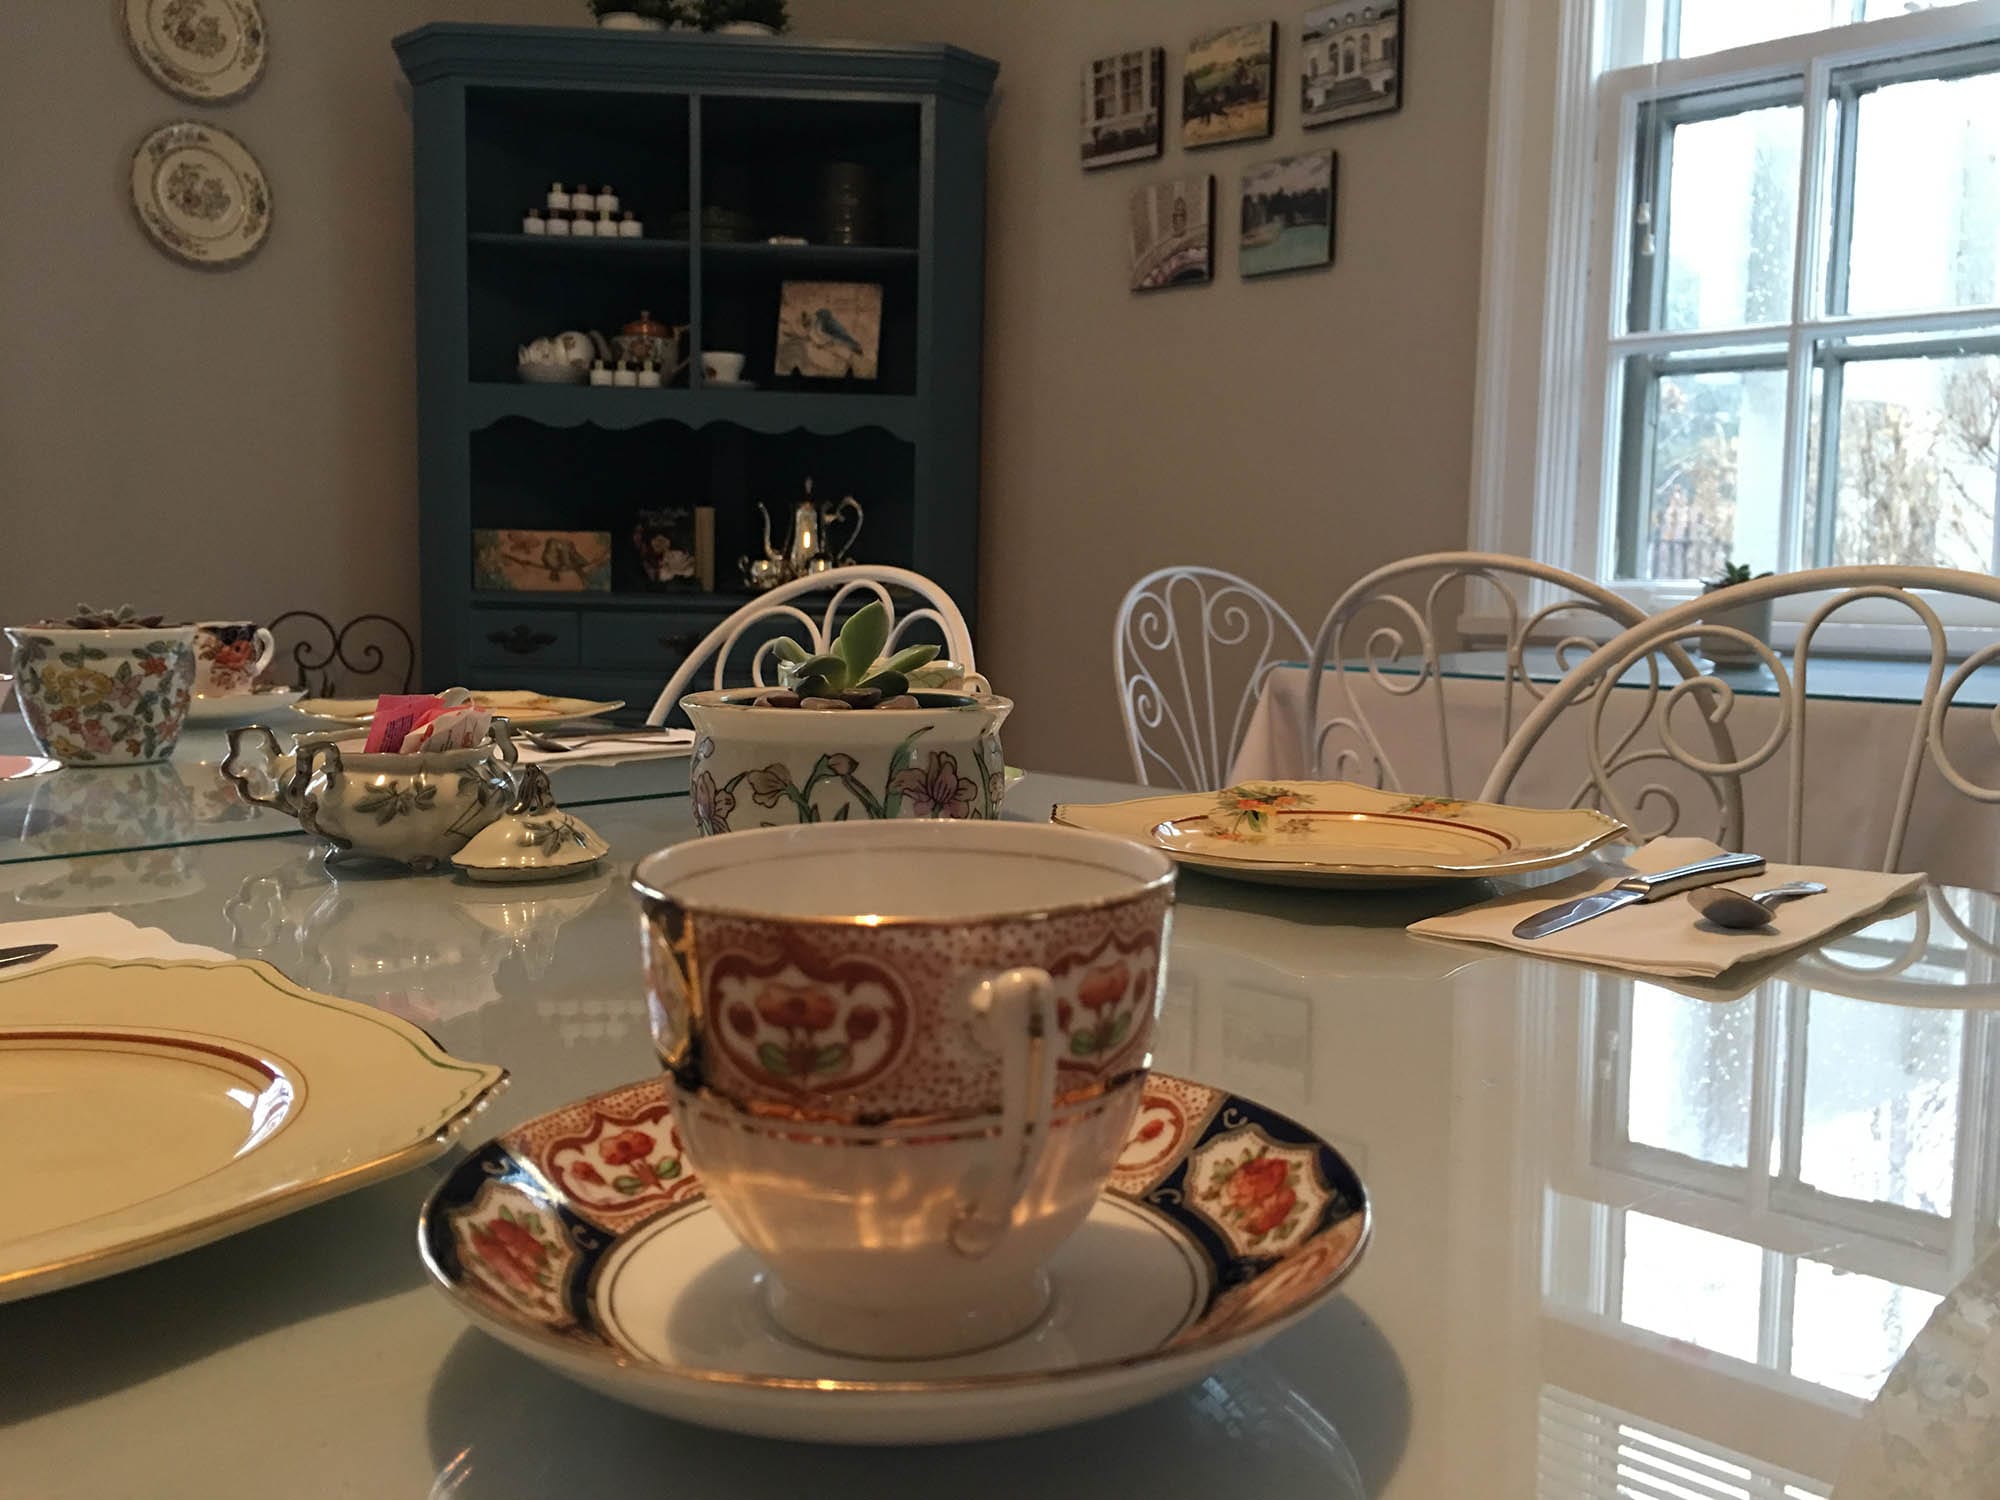 A table set up with antique china for a lunch with teacups and plates